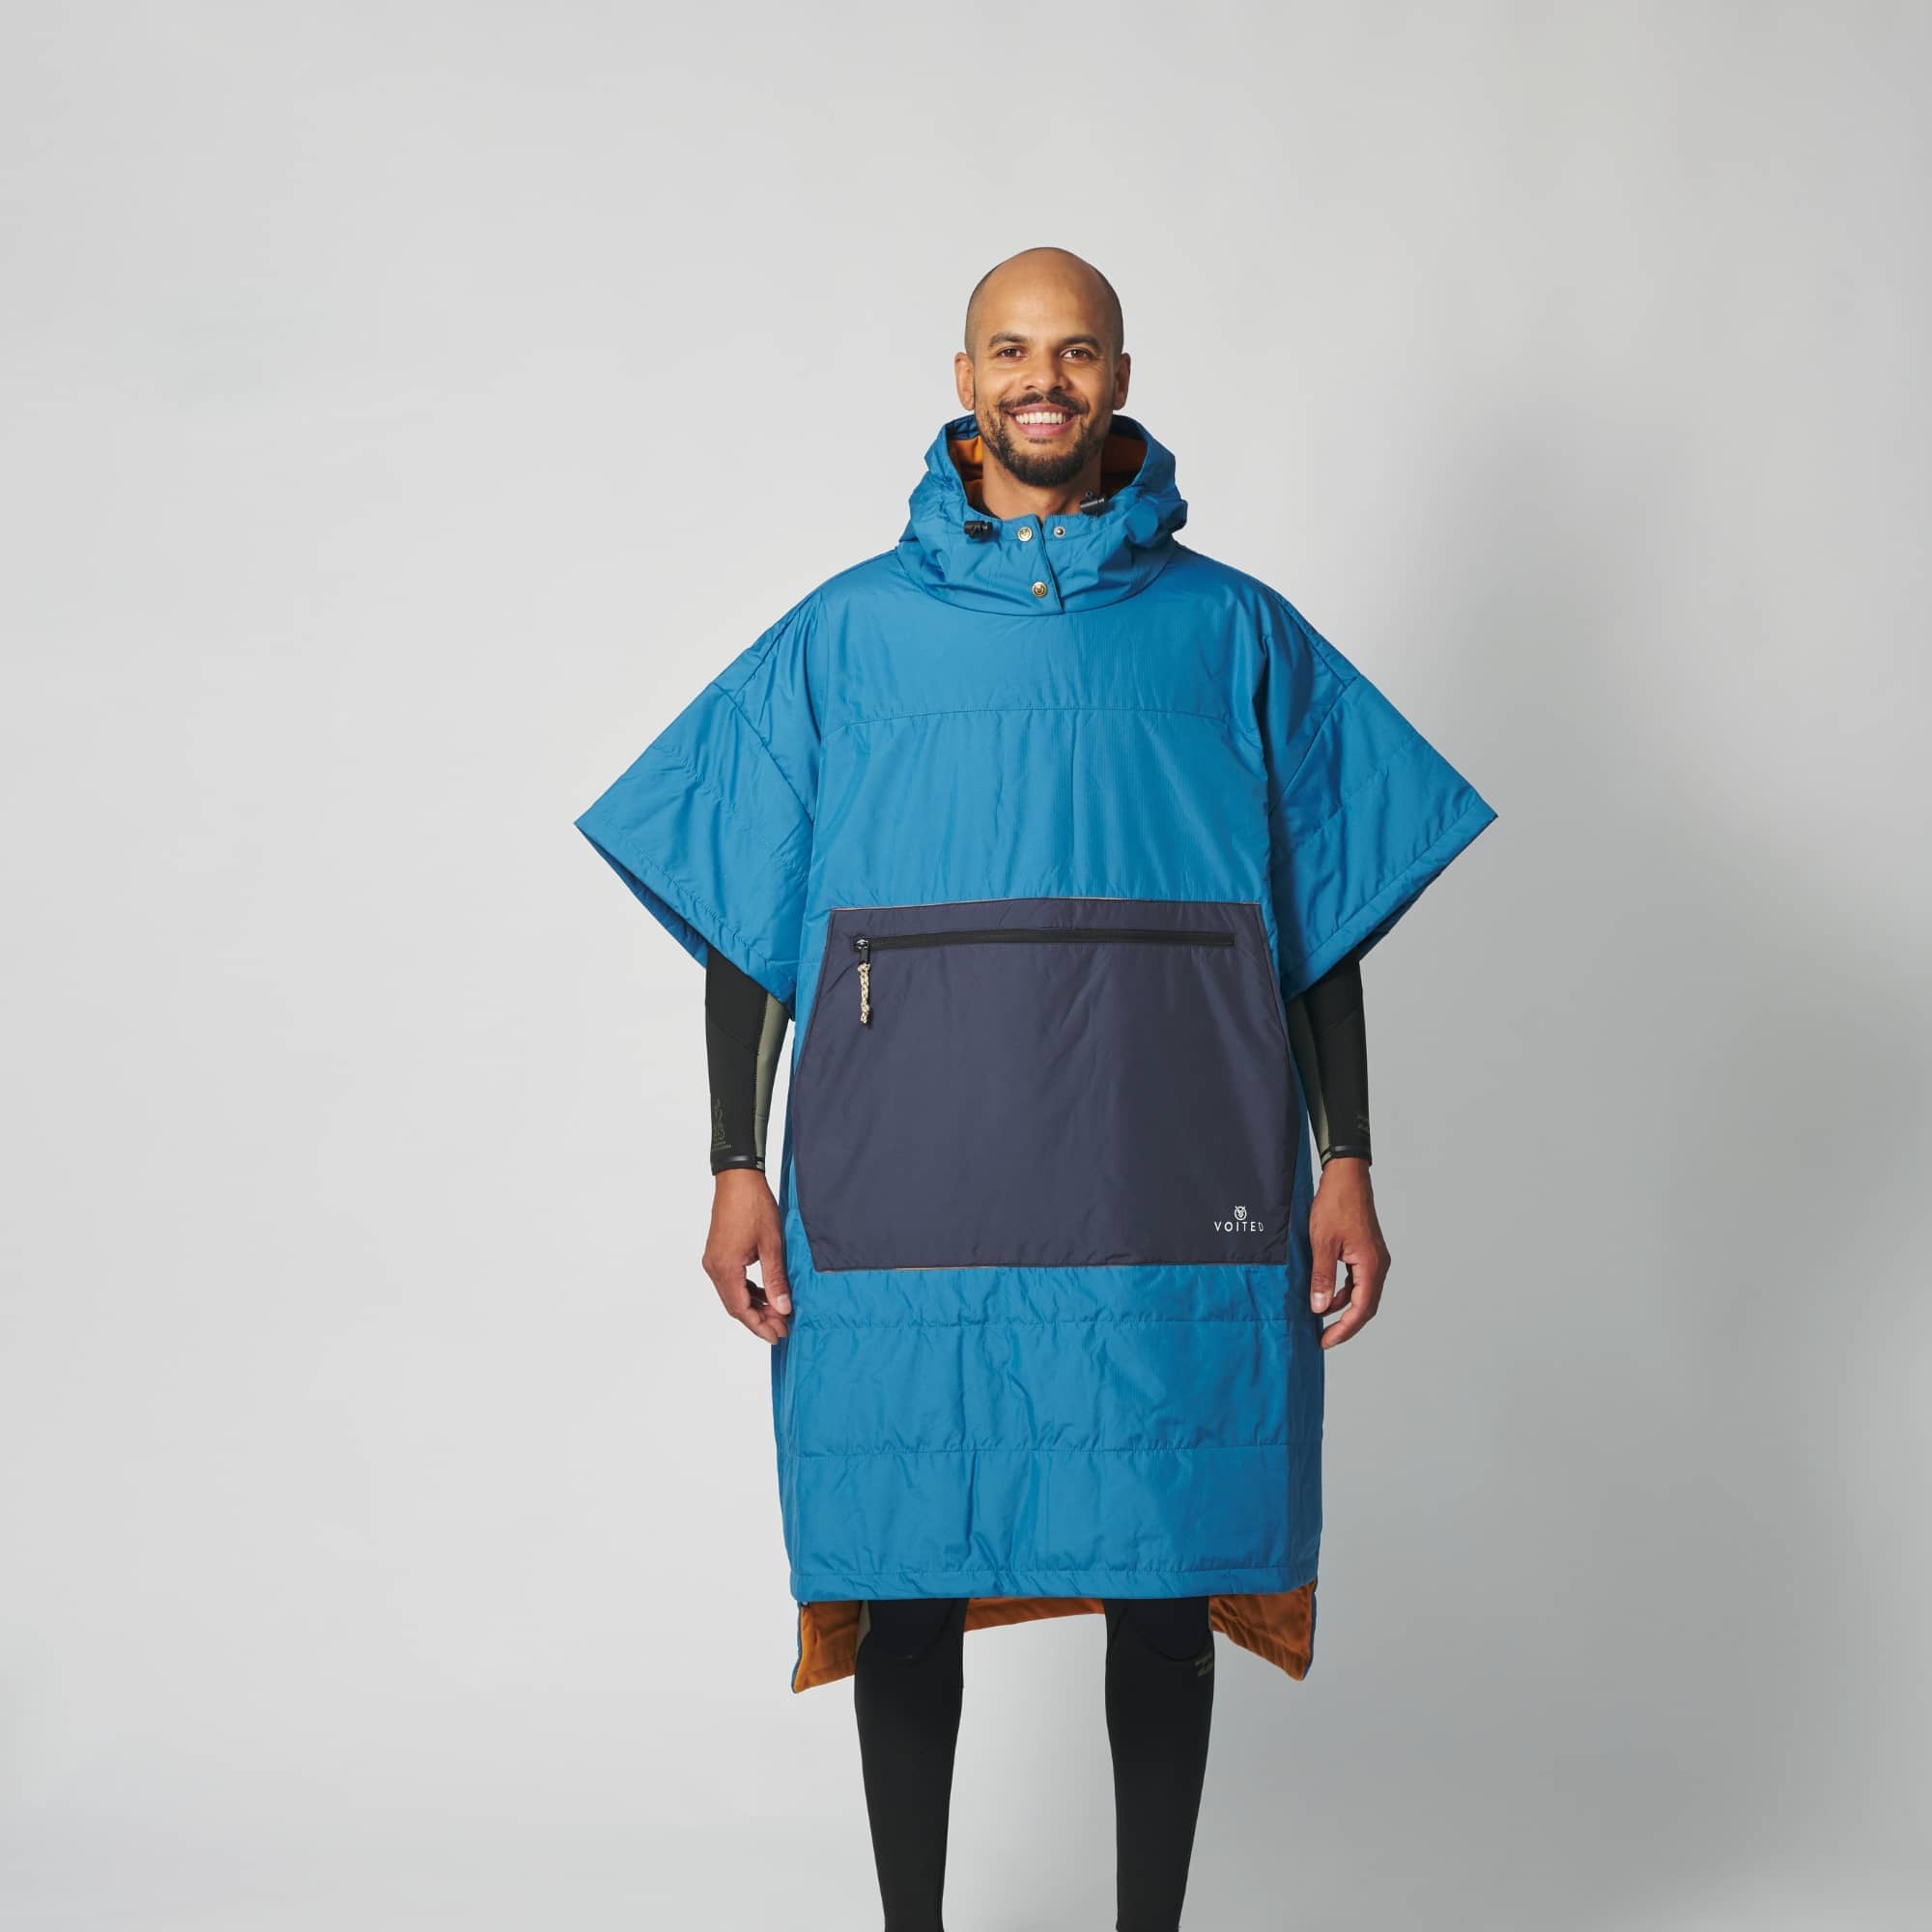 VOITED 2nd Edition Outdoor Poncho for Surfing, Camping, Vanlife & Wild Swimming - Blue Steel